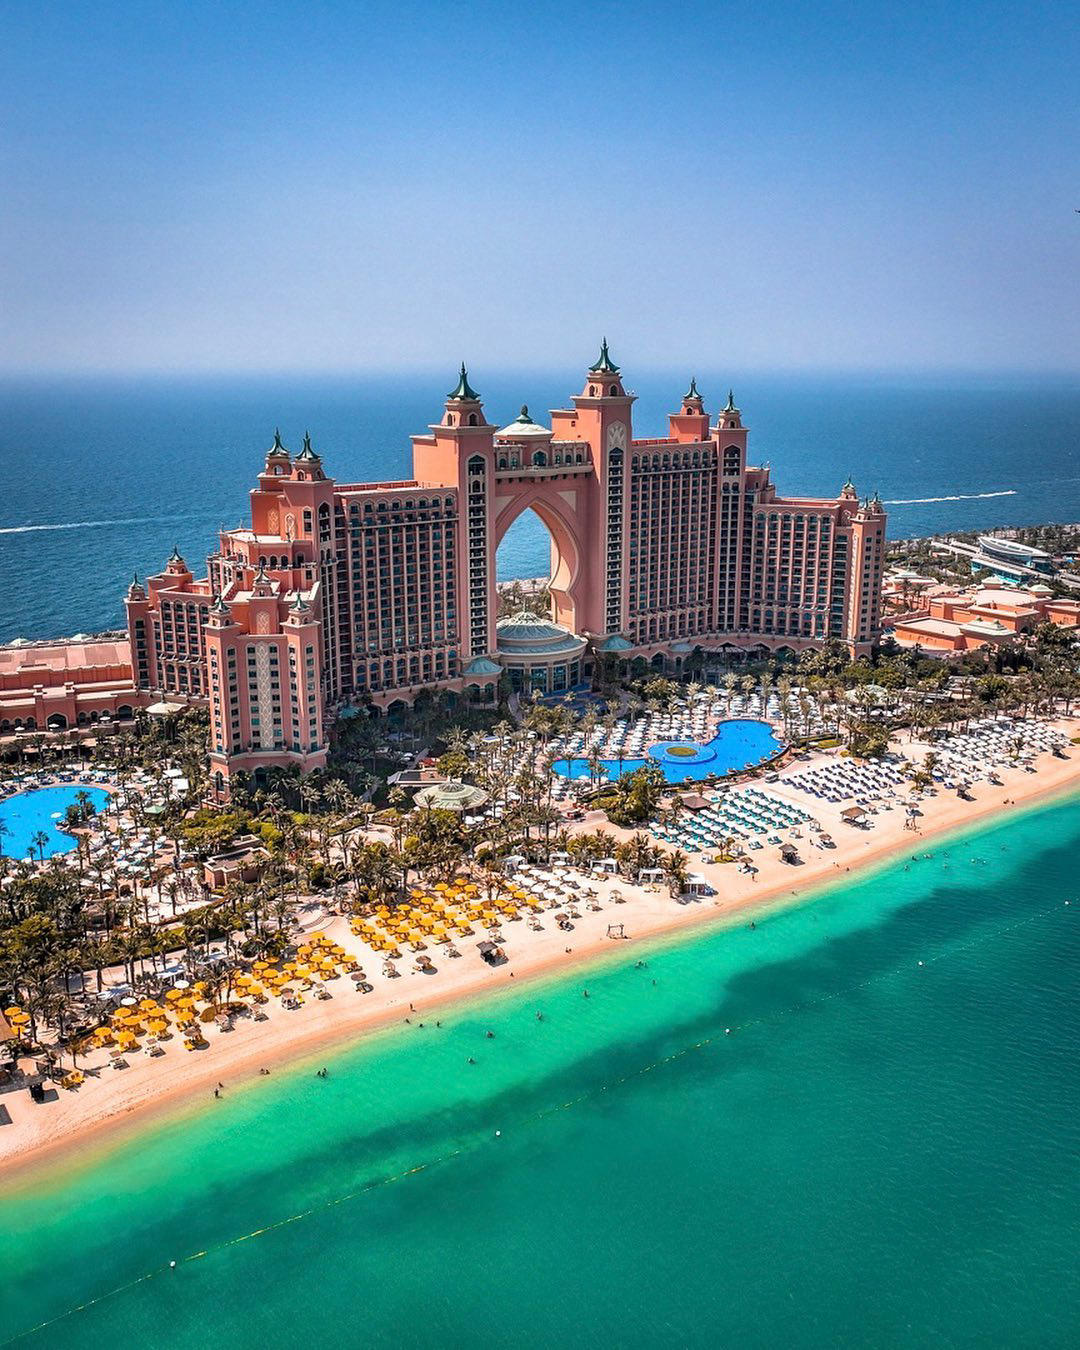 Atlantis The Palm, Dubai - Welcome to the ultimate holiday destination where you can make memories t